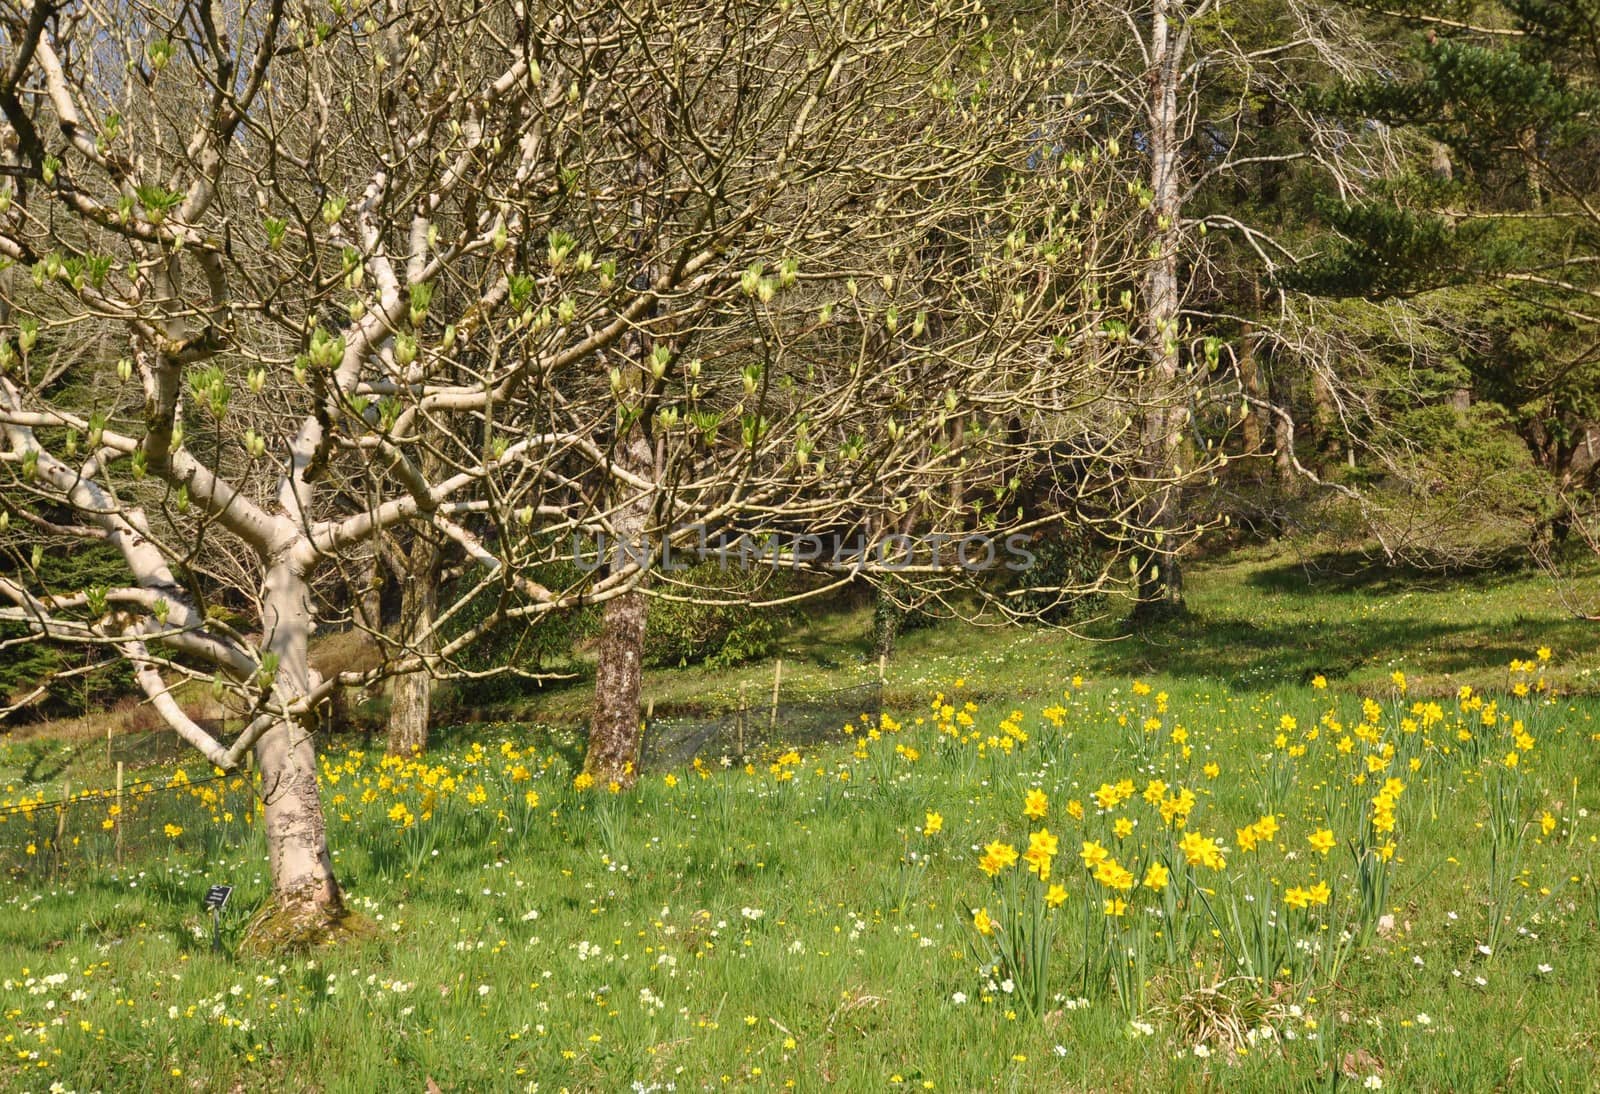 Daffodil meadow within a large English garden